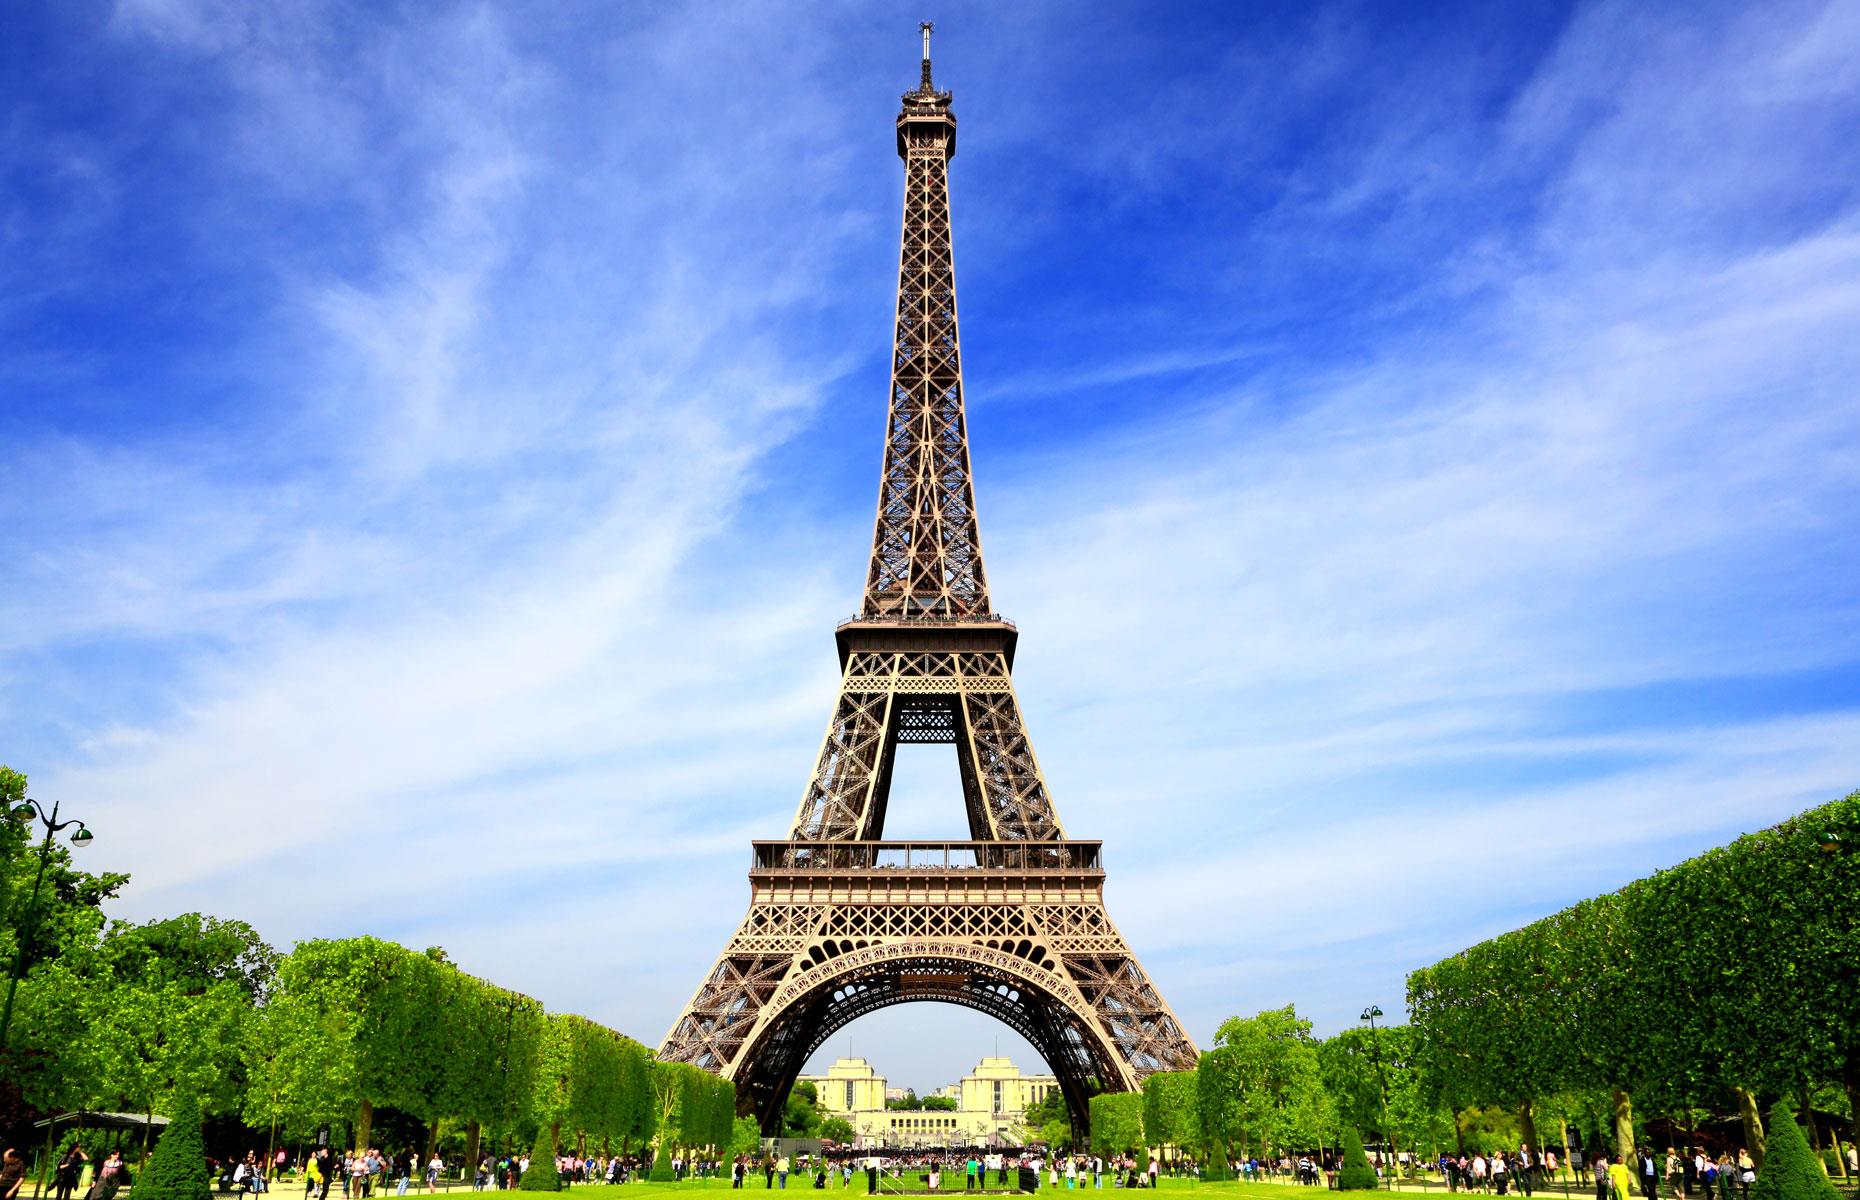 A cultural icon of France recognized the world over, Paris' emblematic Eiffel Tower was commissioned for the 1889 World's Fair on the Champs de Mars to mark the centenary of the French Revolution. But it wasn't the only contender for the site in central Paris.